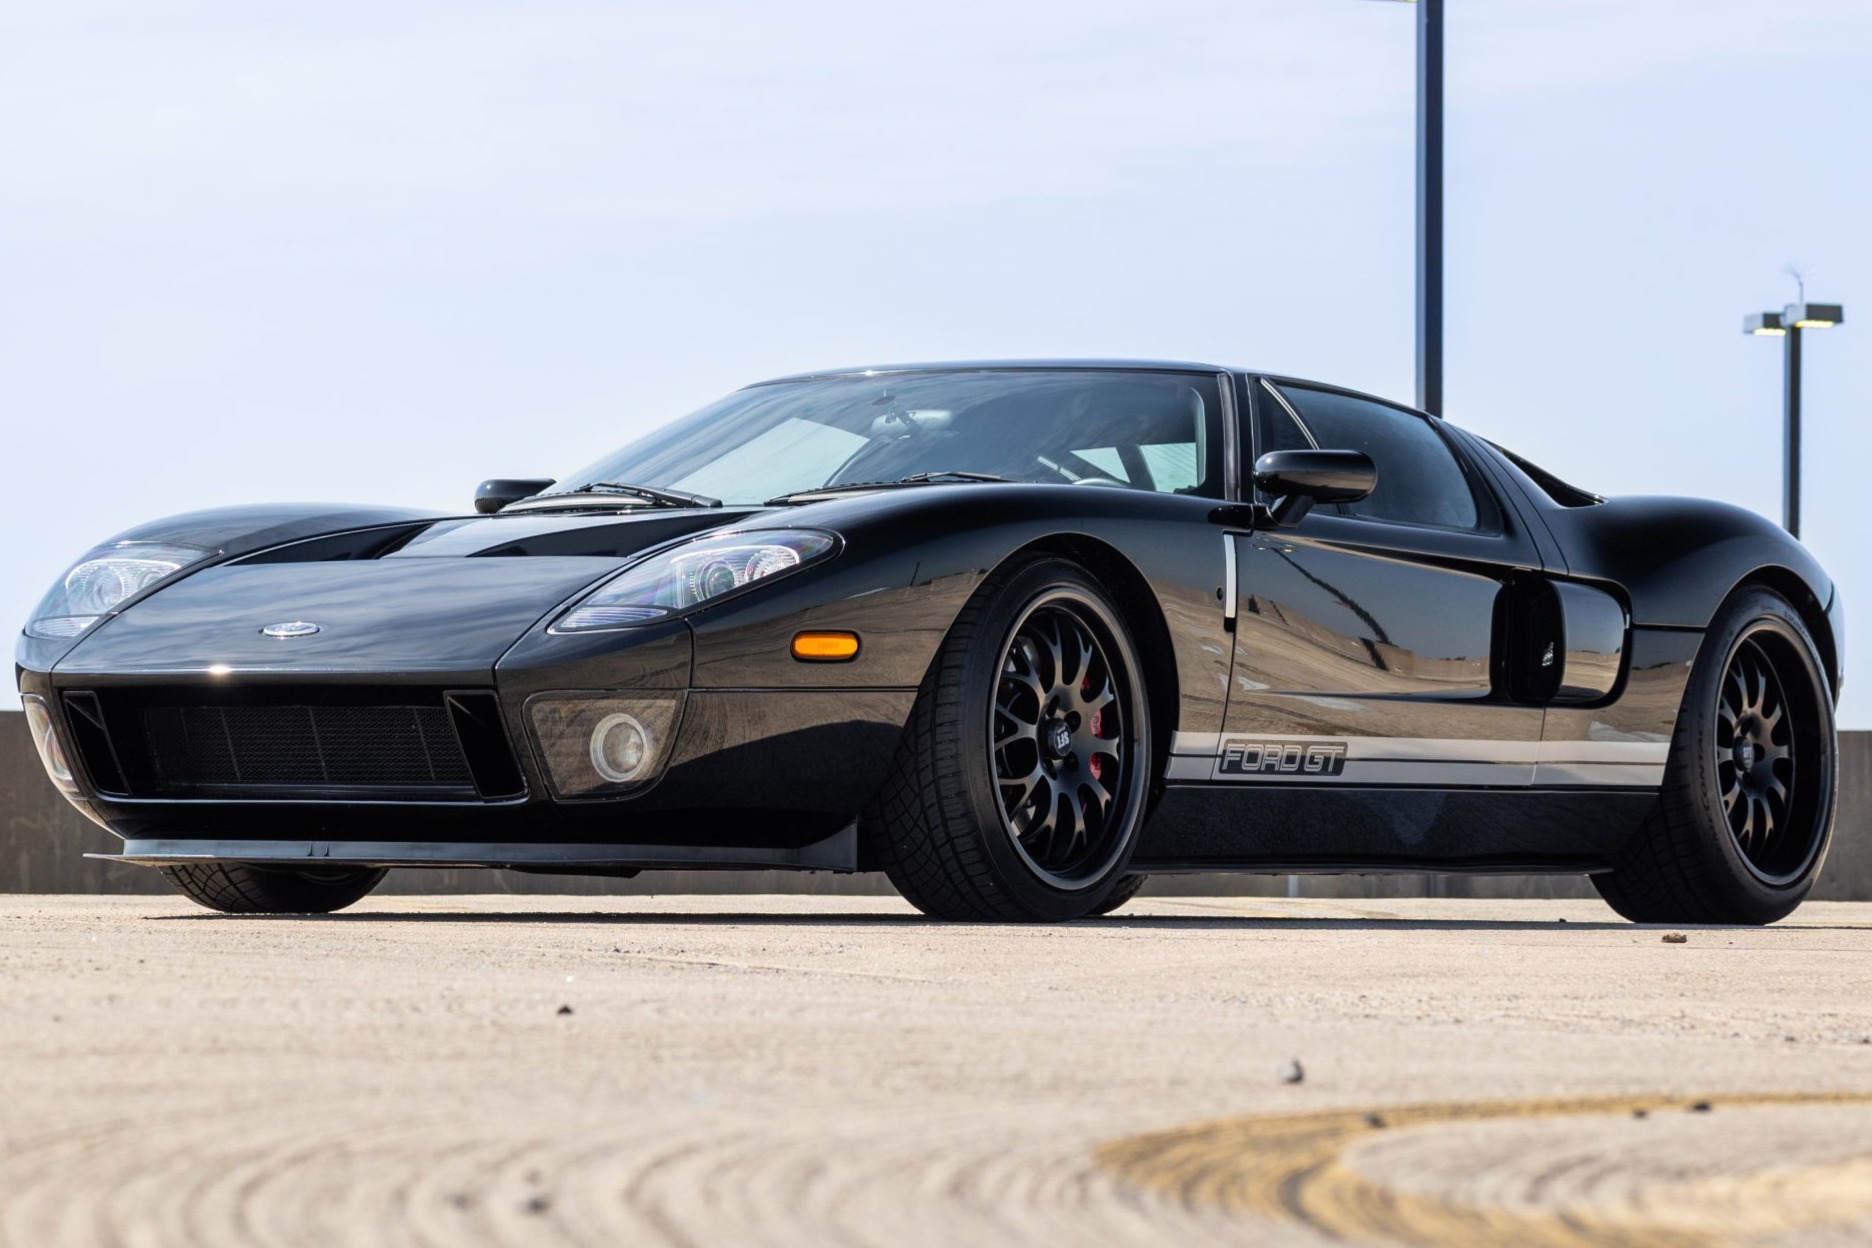 Used Whipple-Supercharged 2005 Ford GT Review